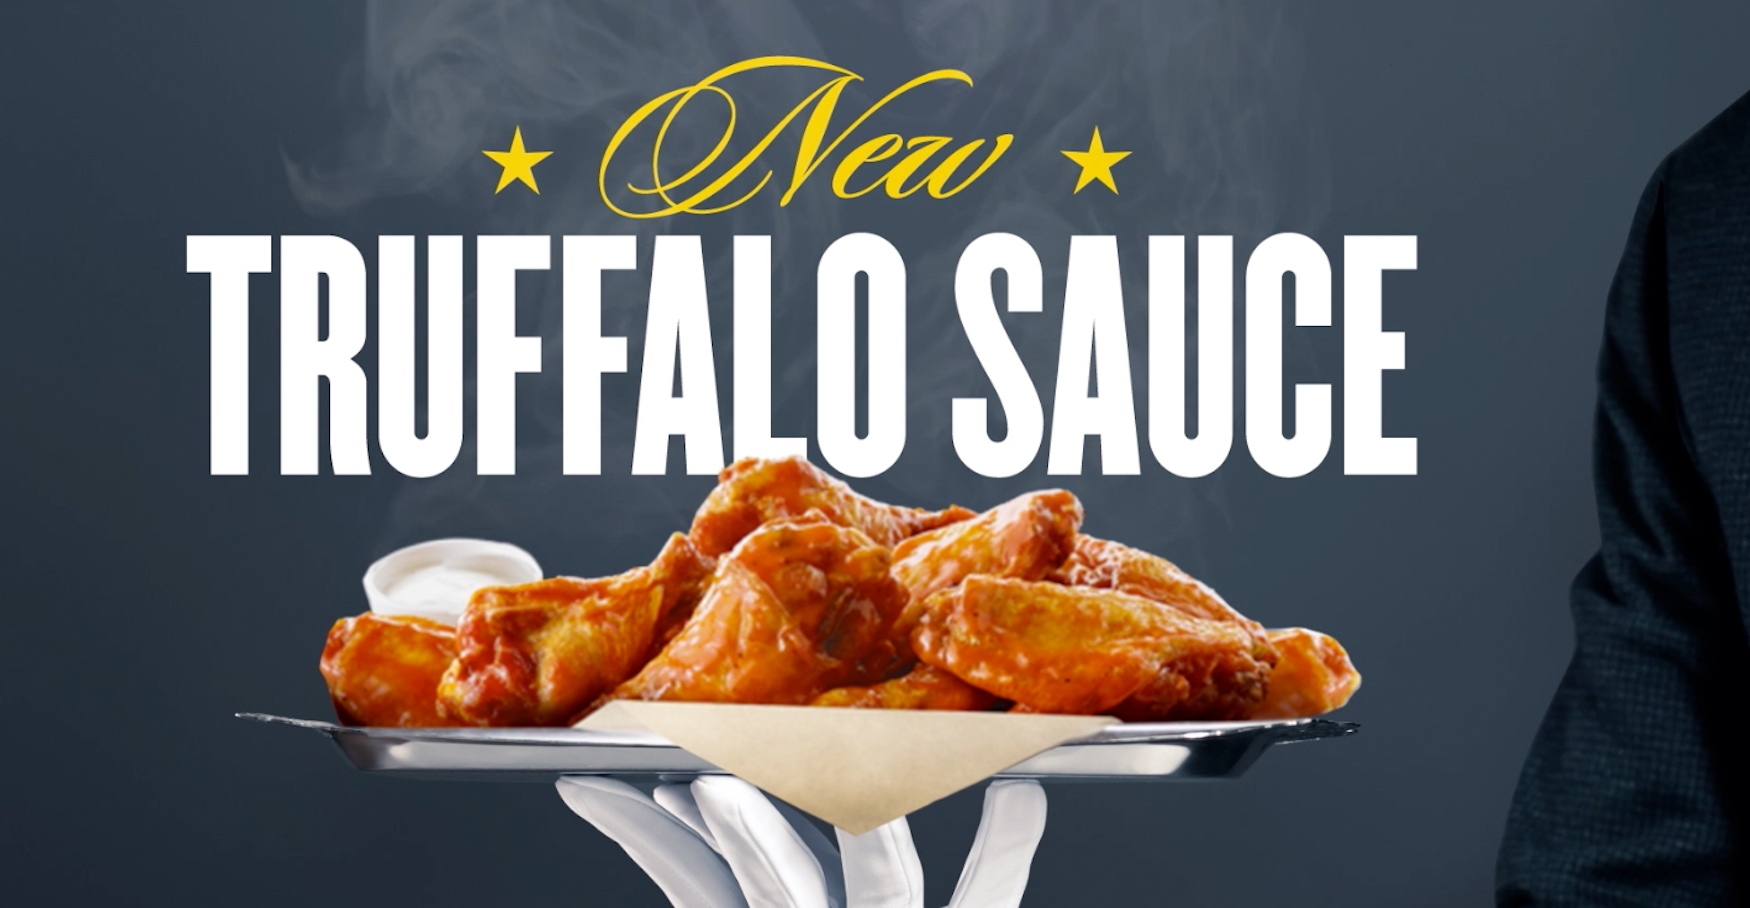 Buffalo Wild Wings Brings Limited Edition Truffalo Sauce To Sports Bars Nationwide